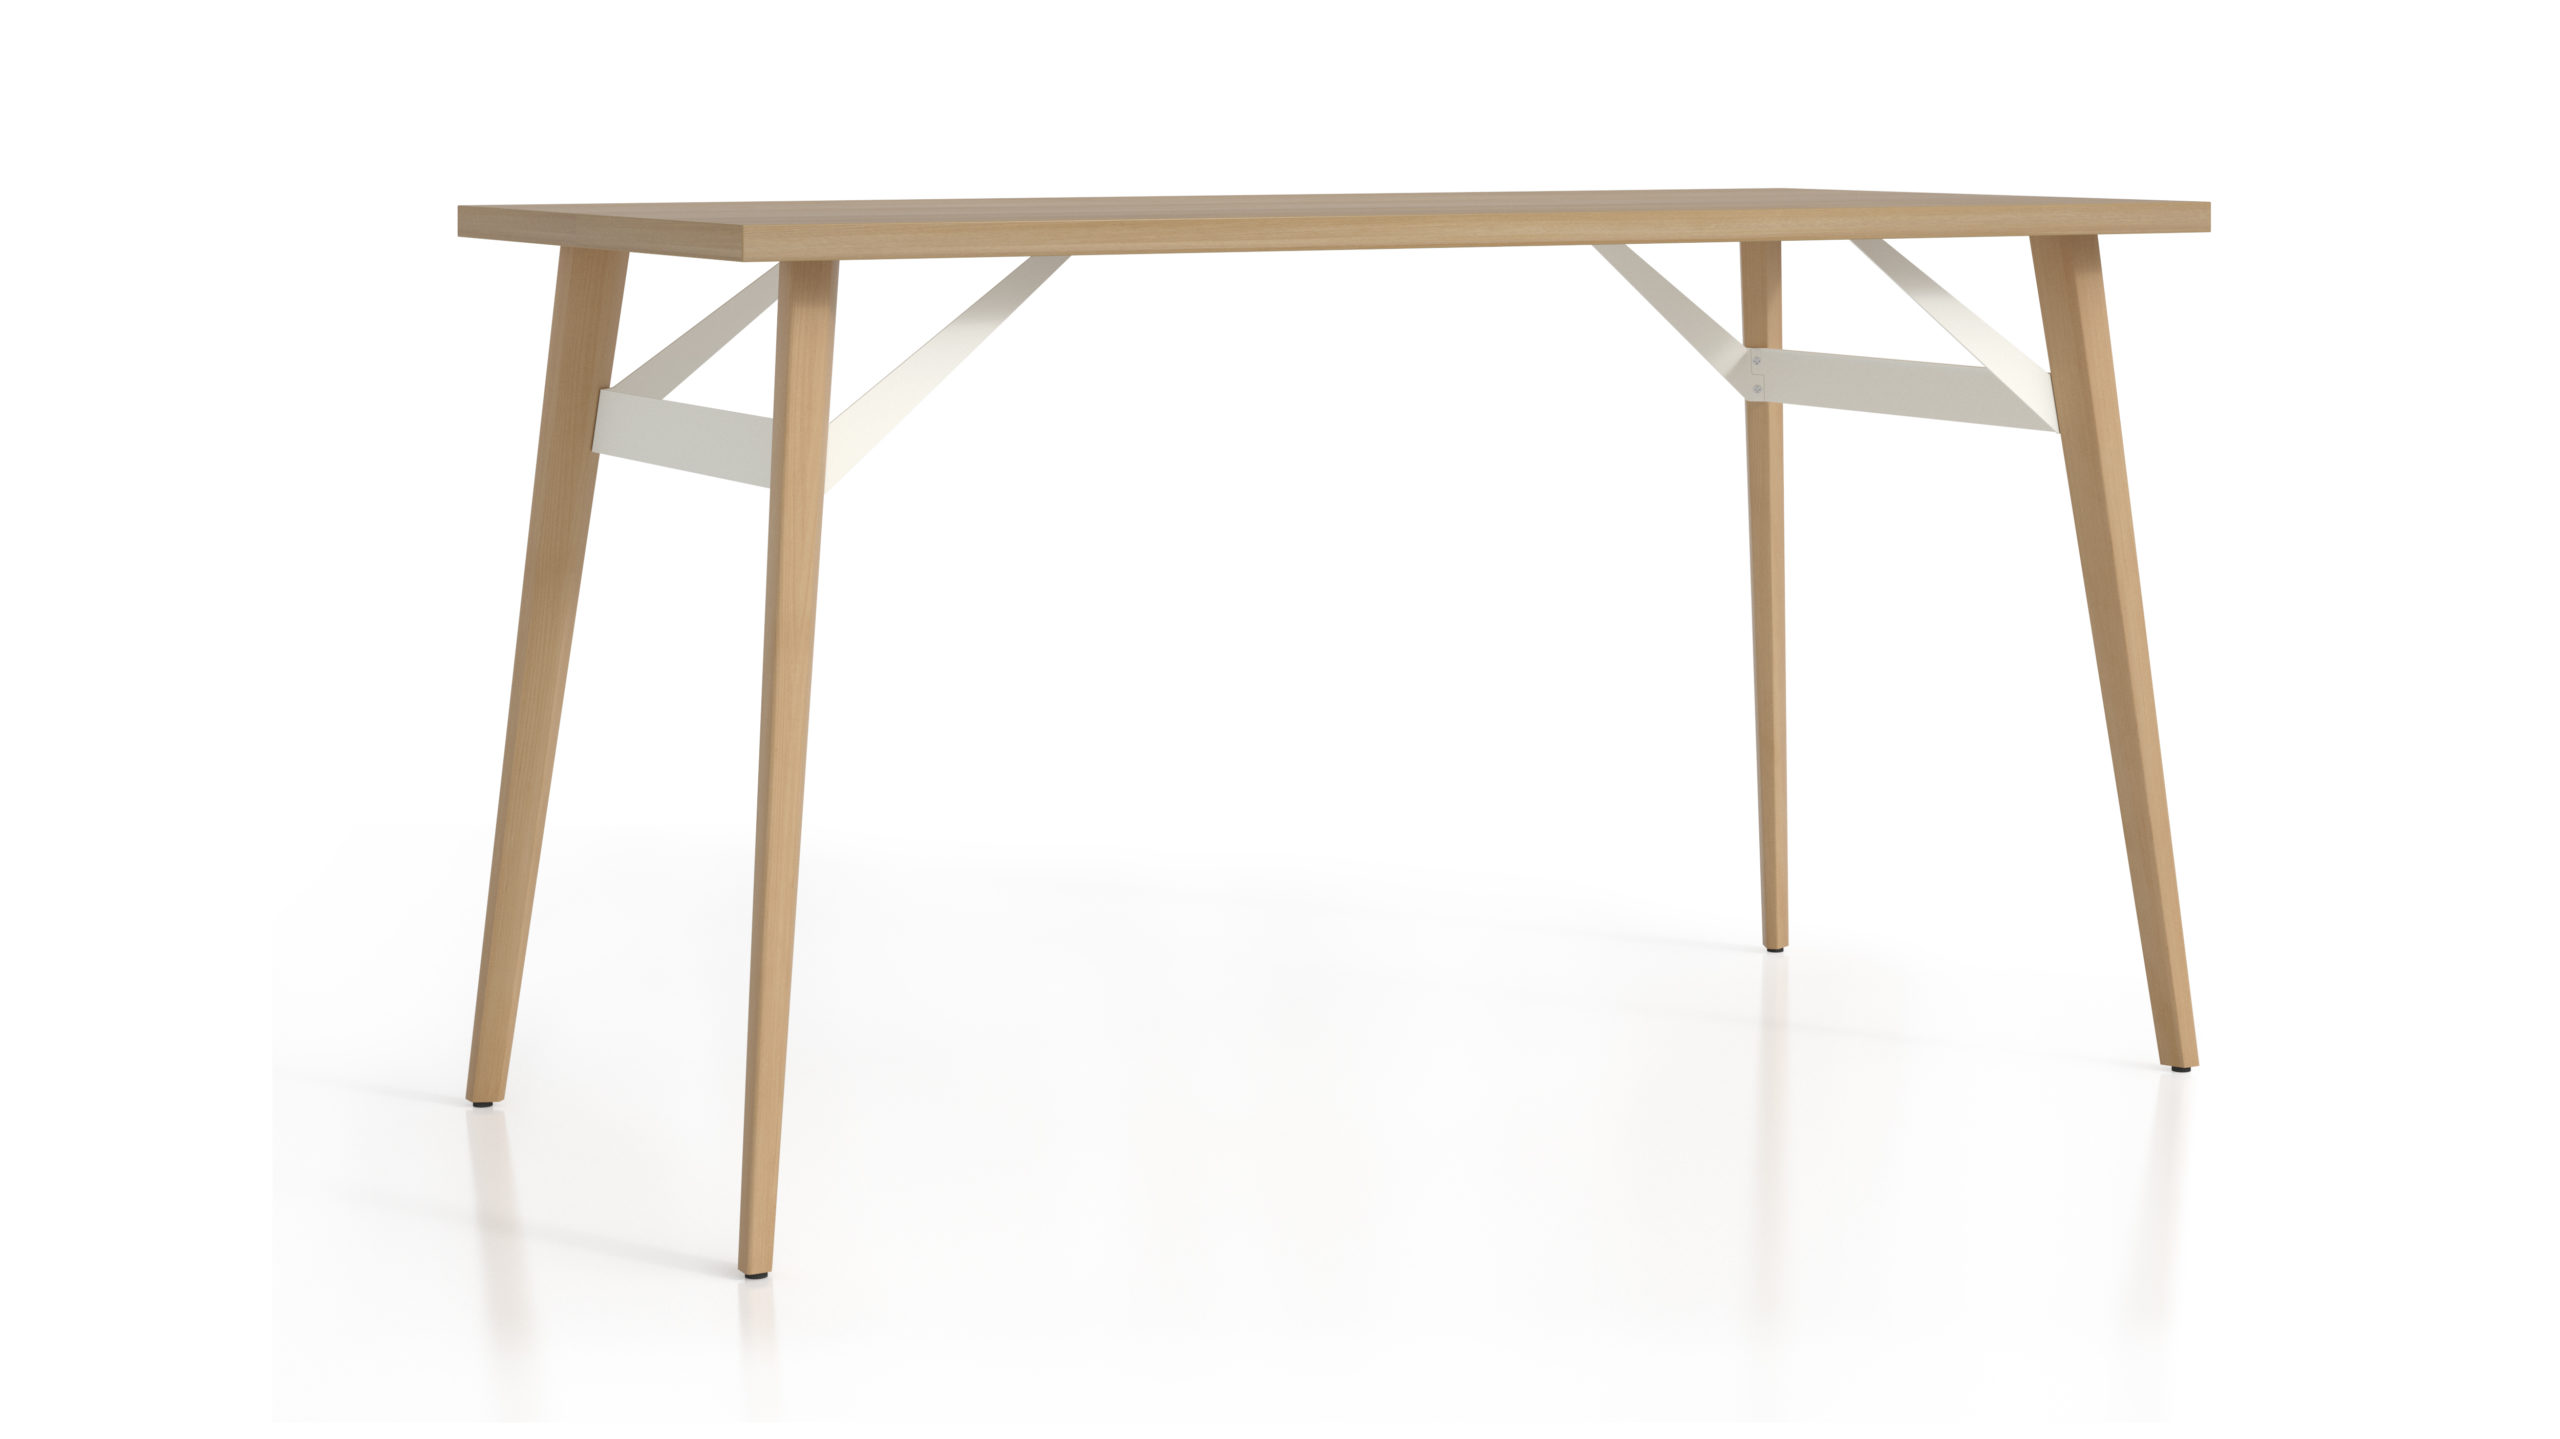 STAD | Freestanding Cafe Height Table - HST Corporate Interiors